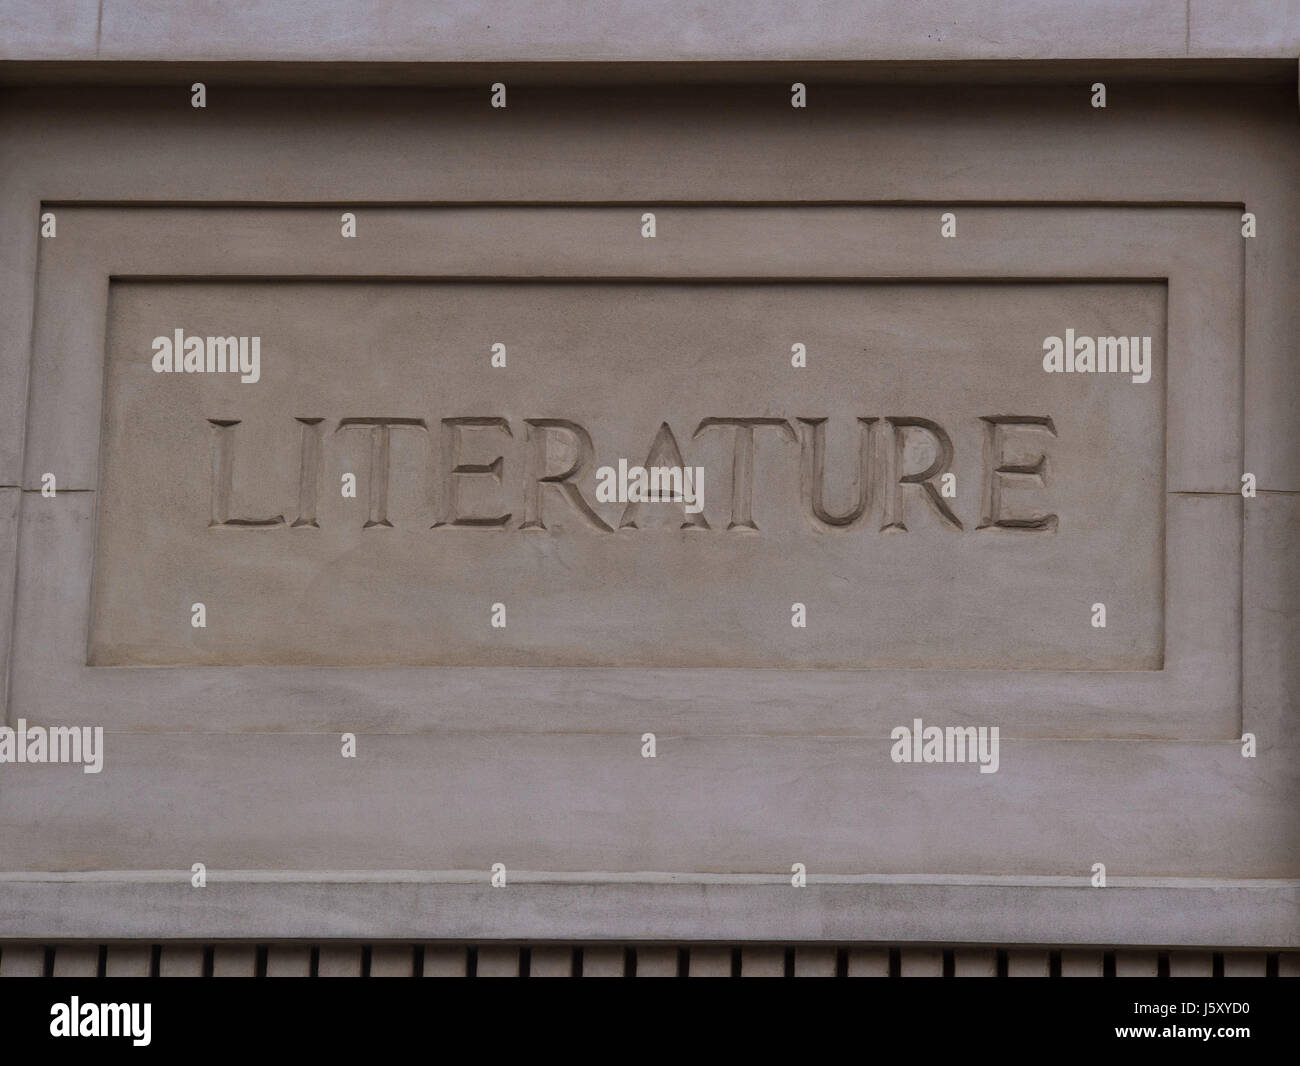 The Word Literature Etched In Stone On The Facade Of A Building Stock Photo